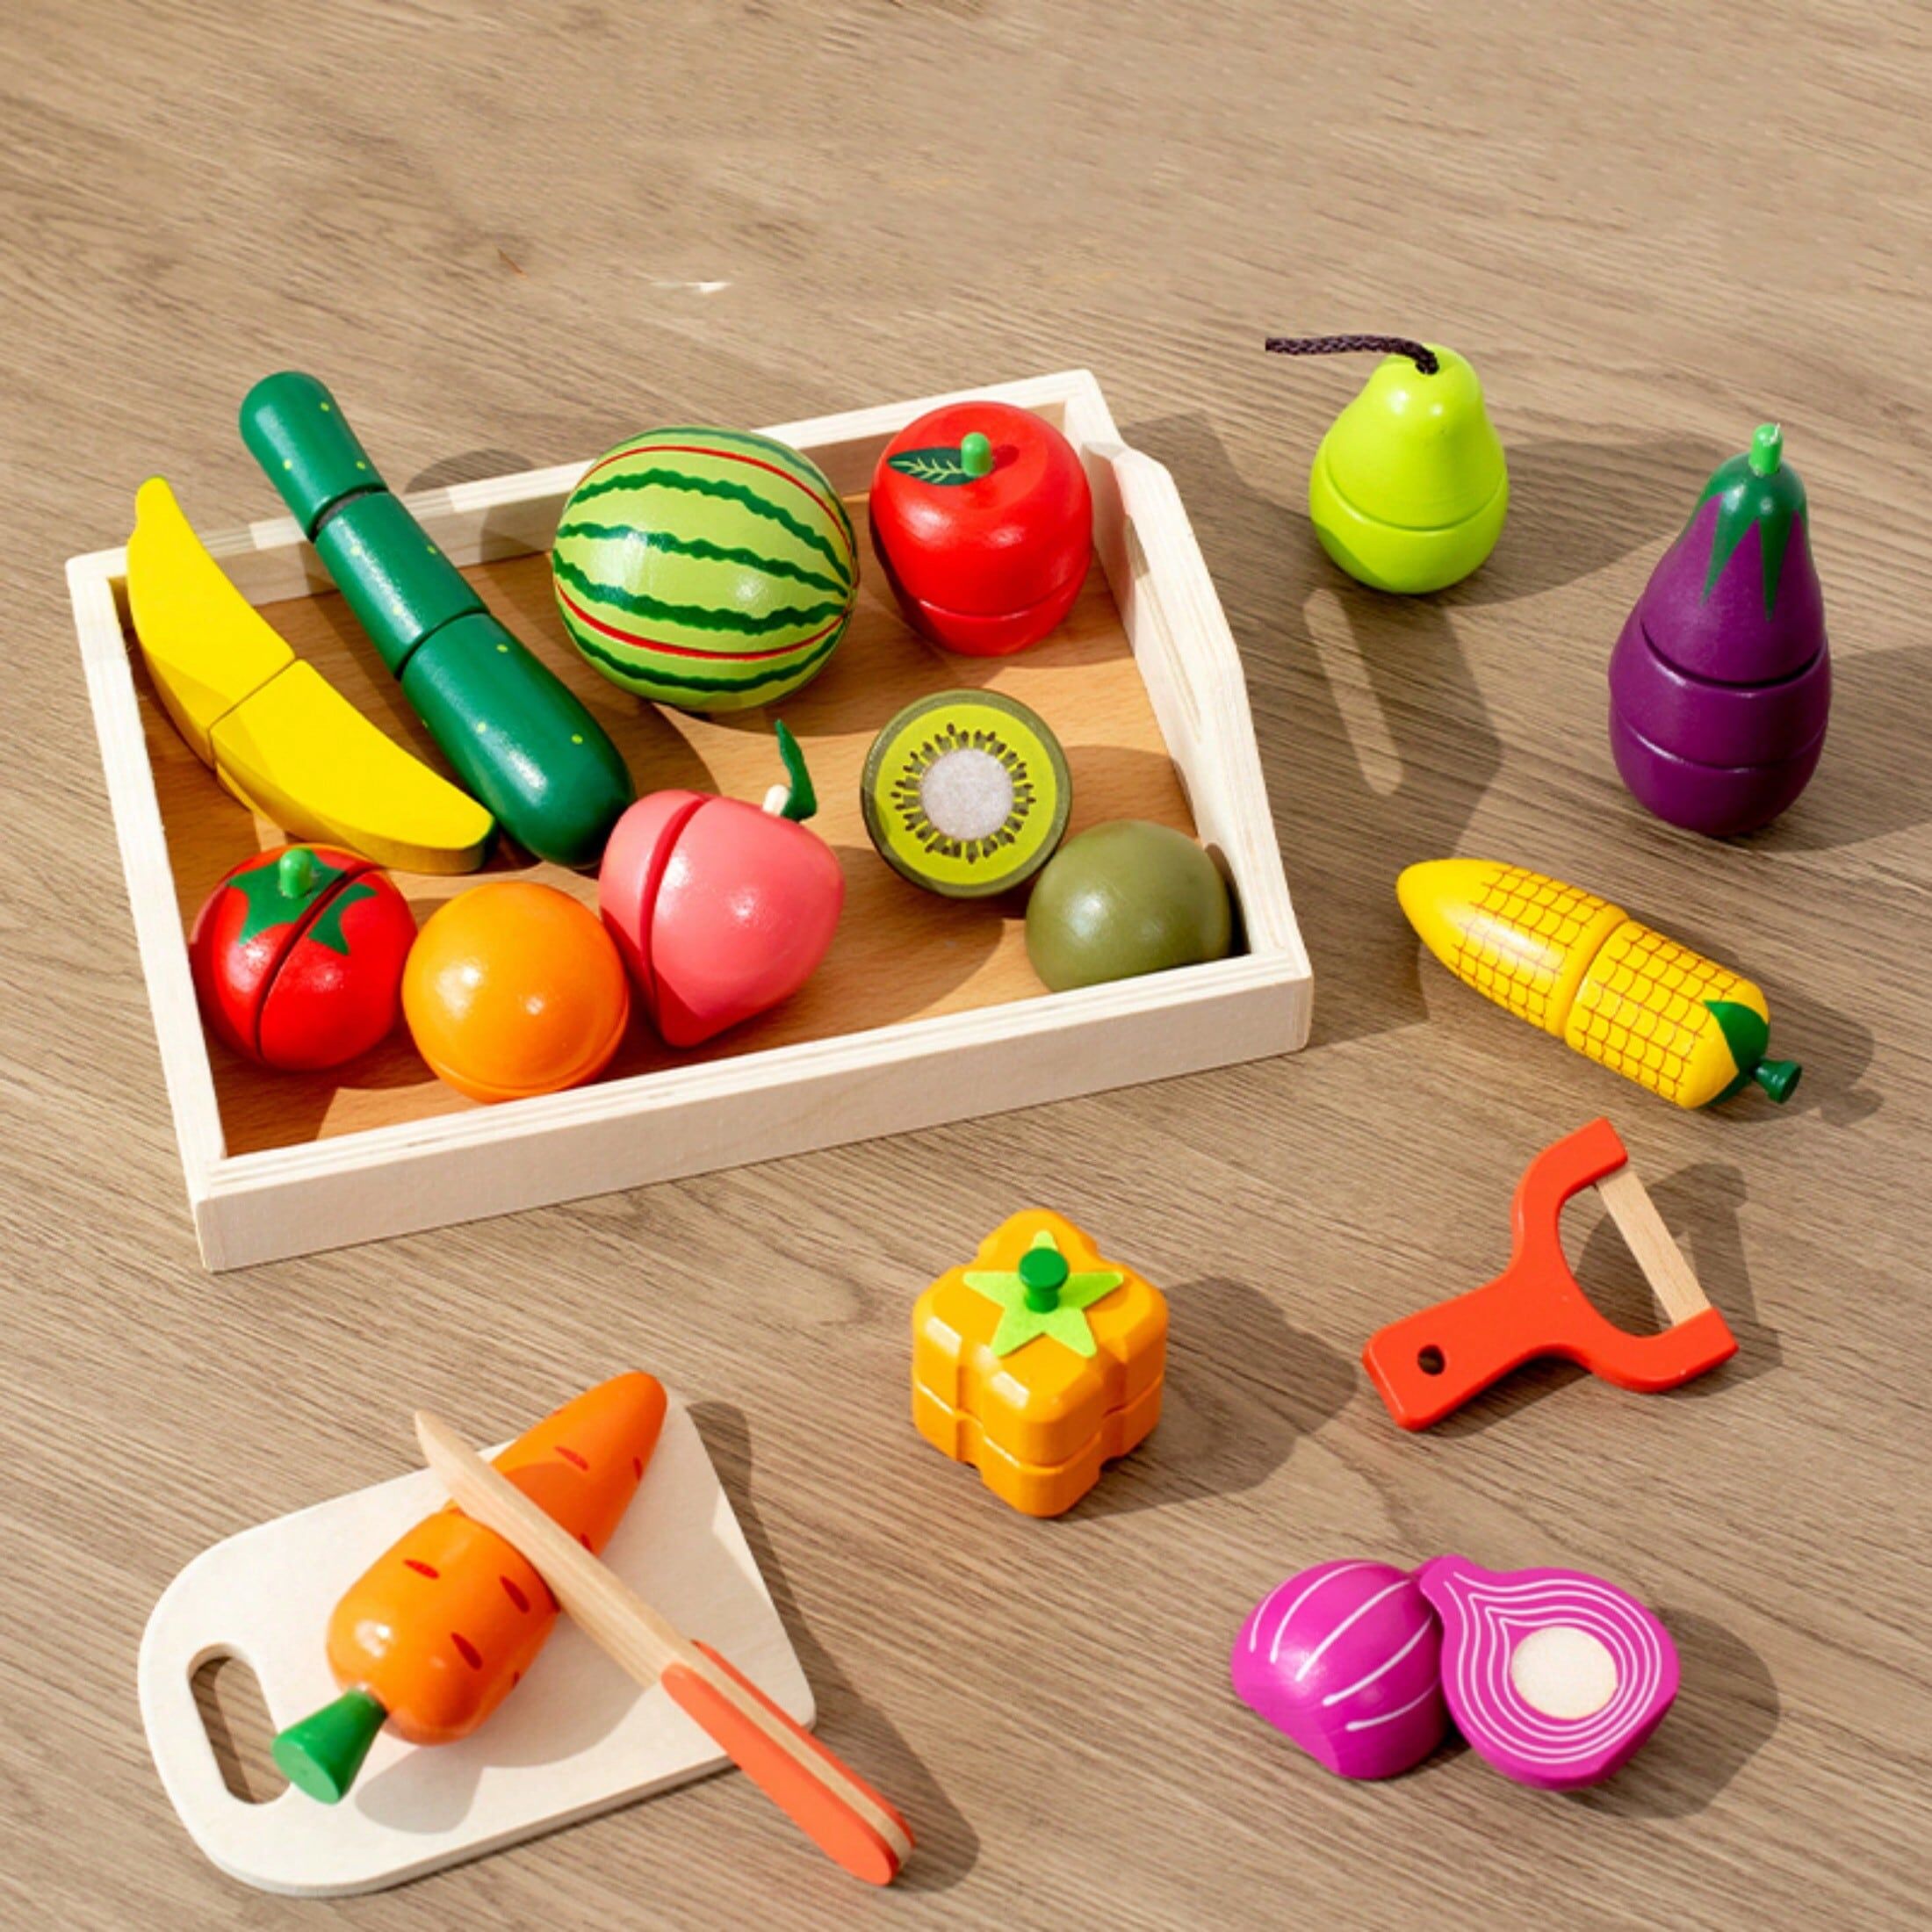 SHEIN [18pcs Wooden Fruit & Vegetable Chopping Playset] Wooden Cutting Fruit & Vegetable Pretend Play Set With Magic For Kids, Preschool Education & Home Kitchen Cooking Fun Multicolor one-size